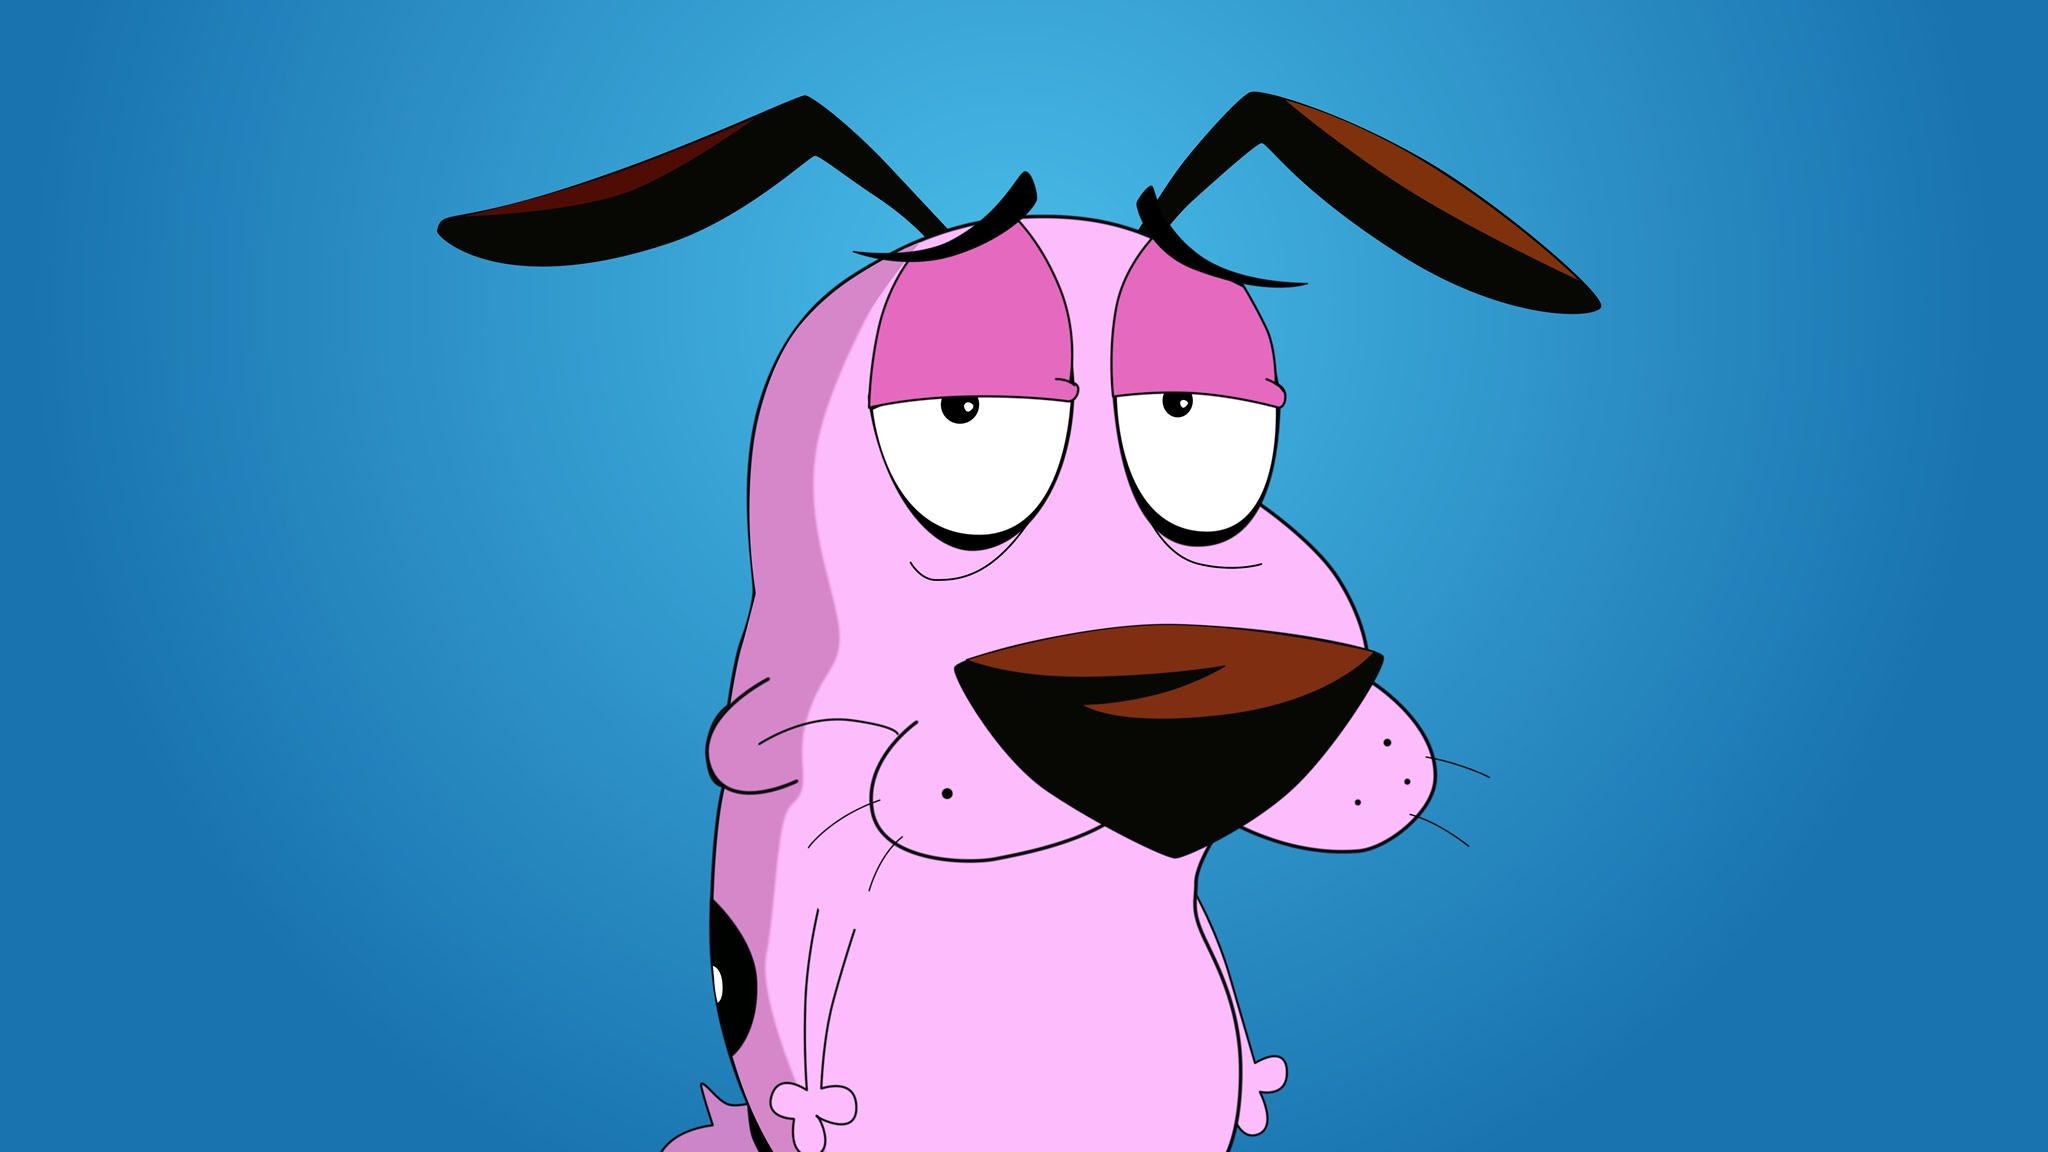 2048x1152 Courage The Cowardly Dog Computer Wallpapers, Desktop Backgrounds .